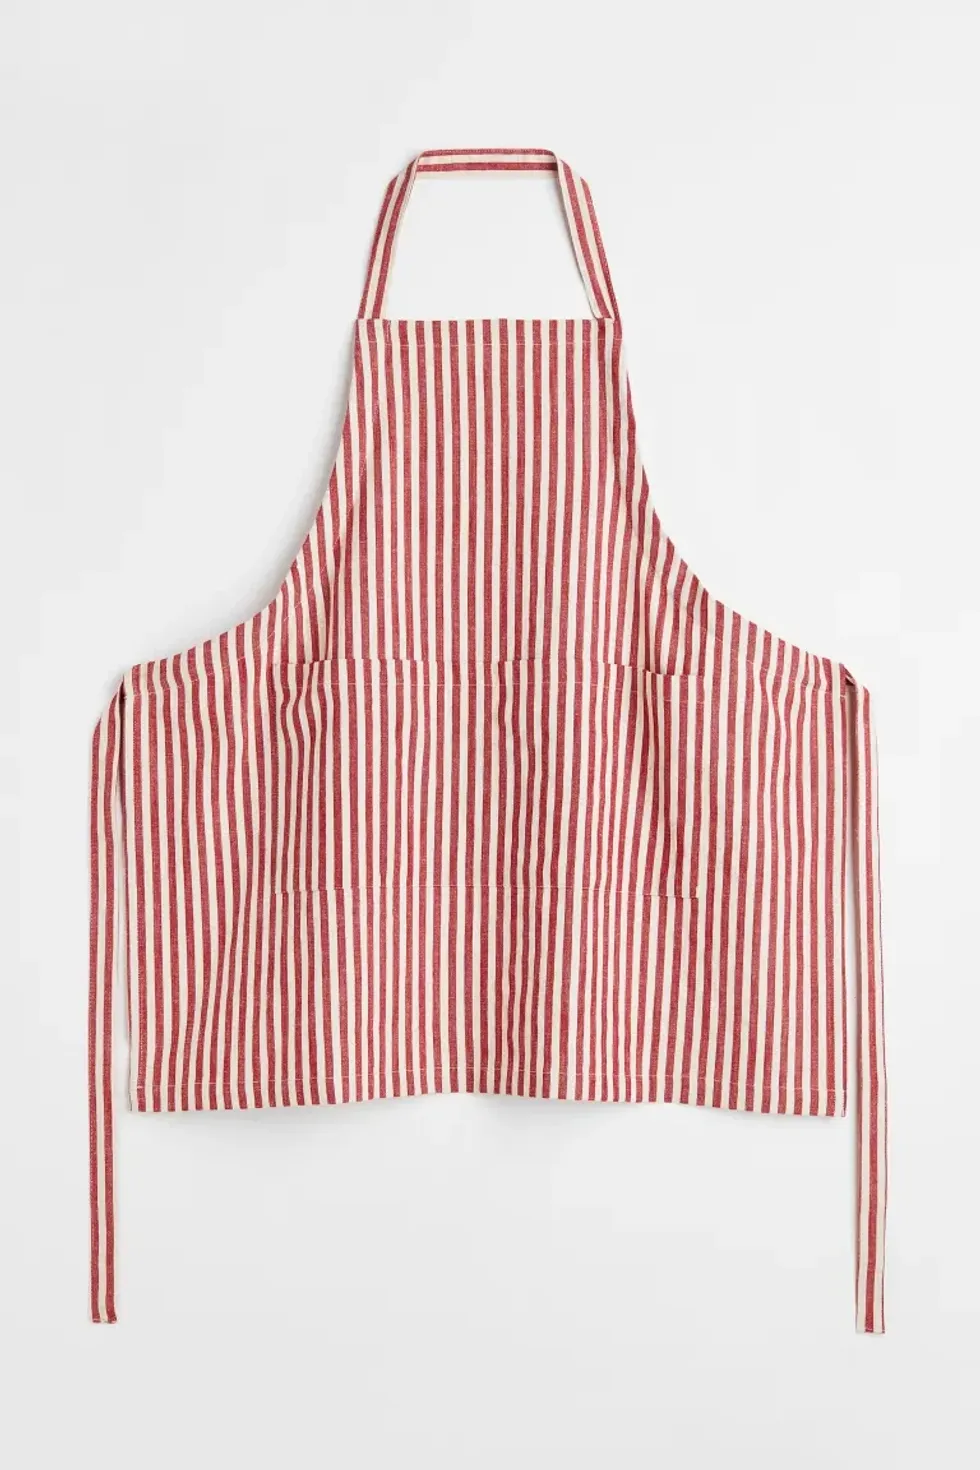 Red Striped Apron